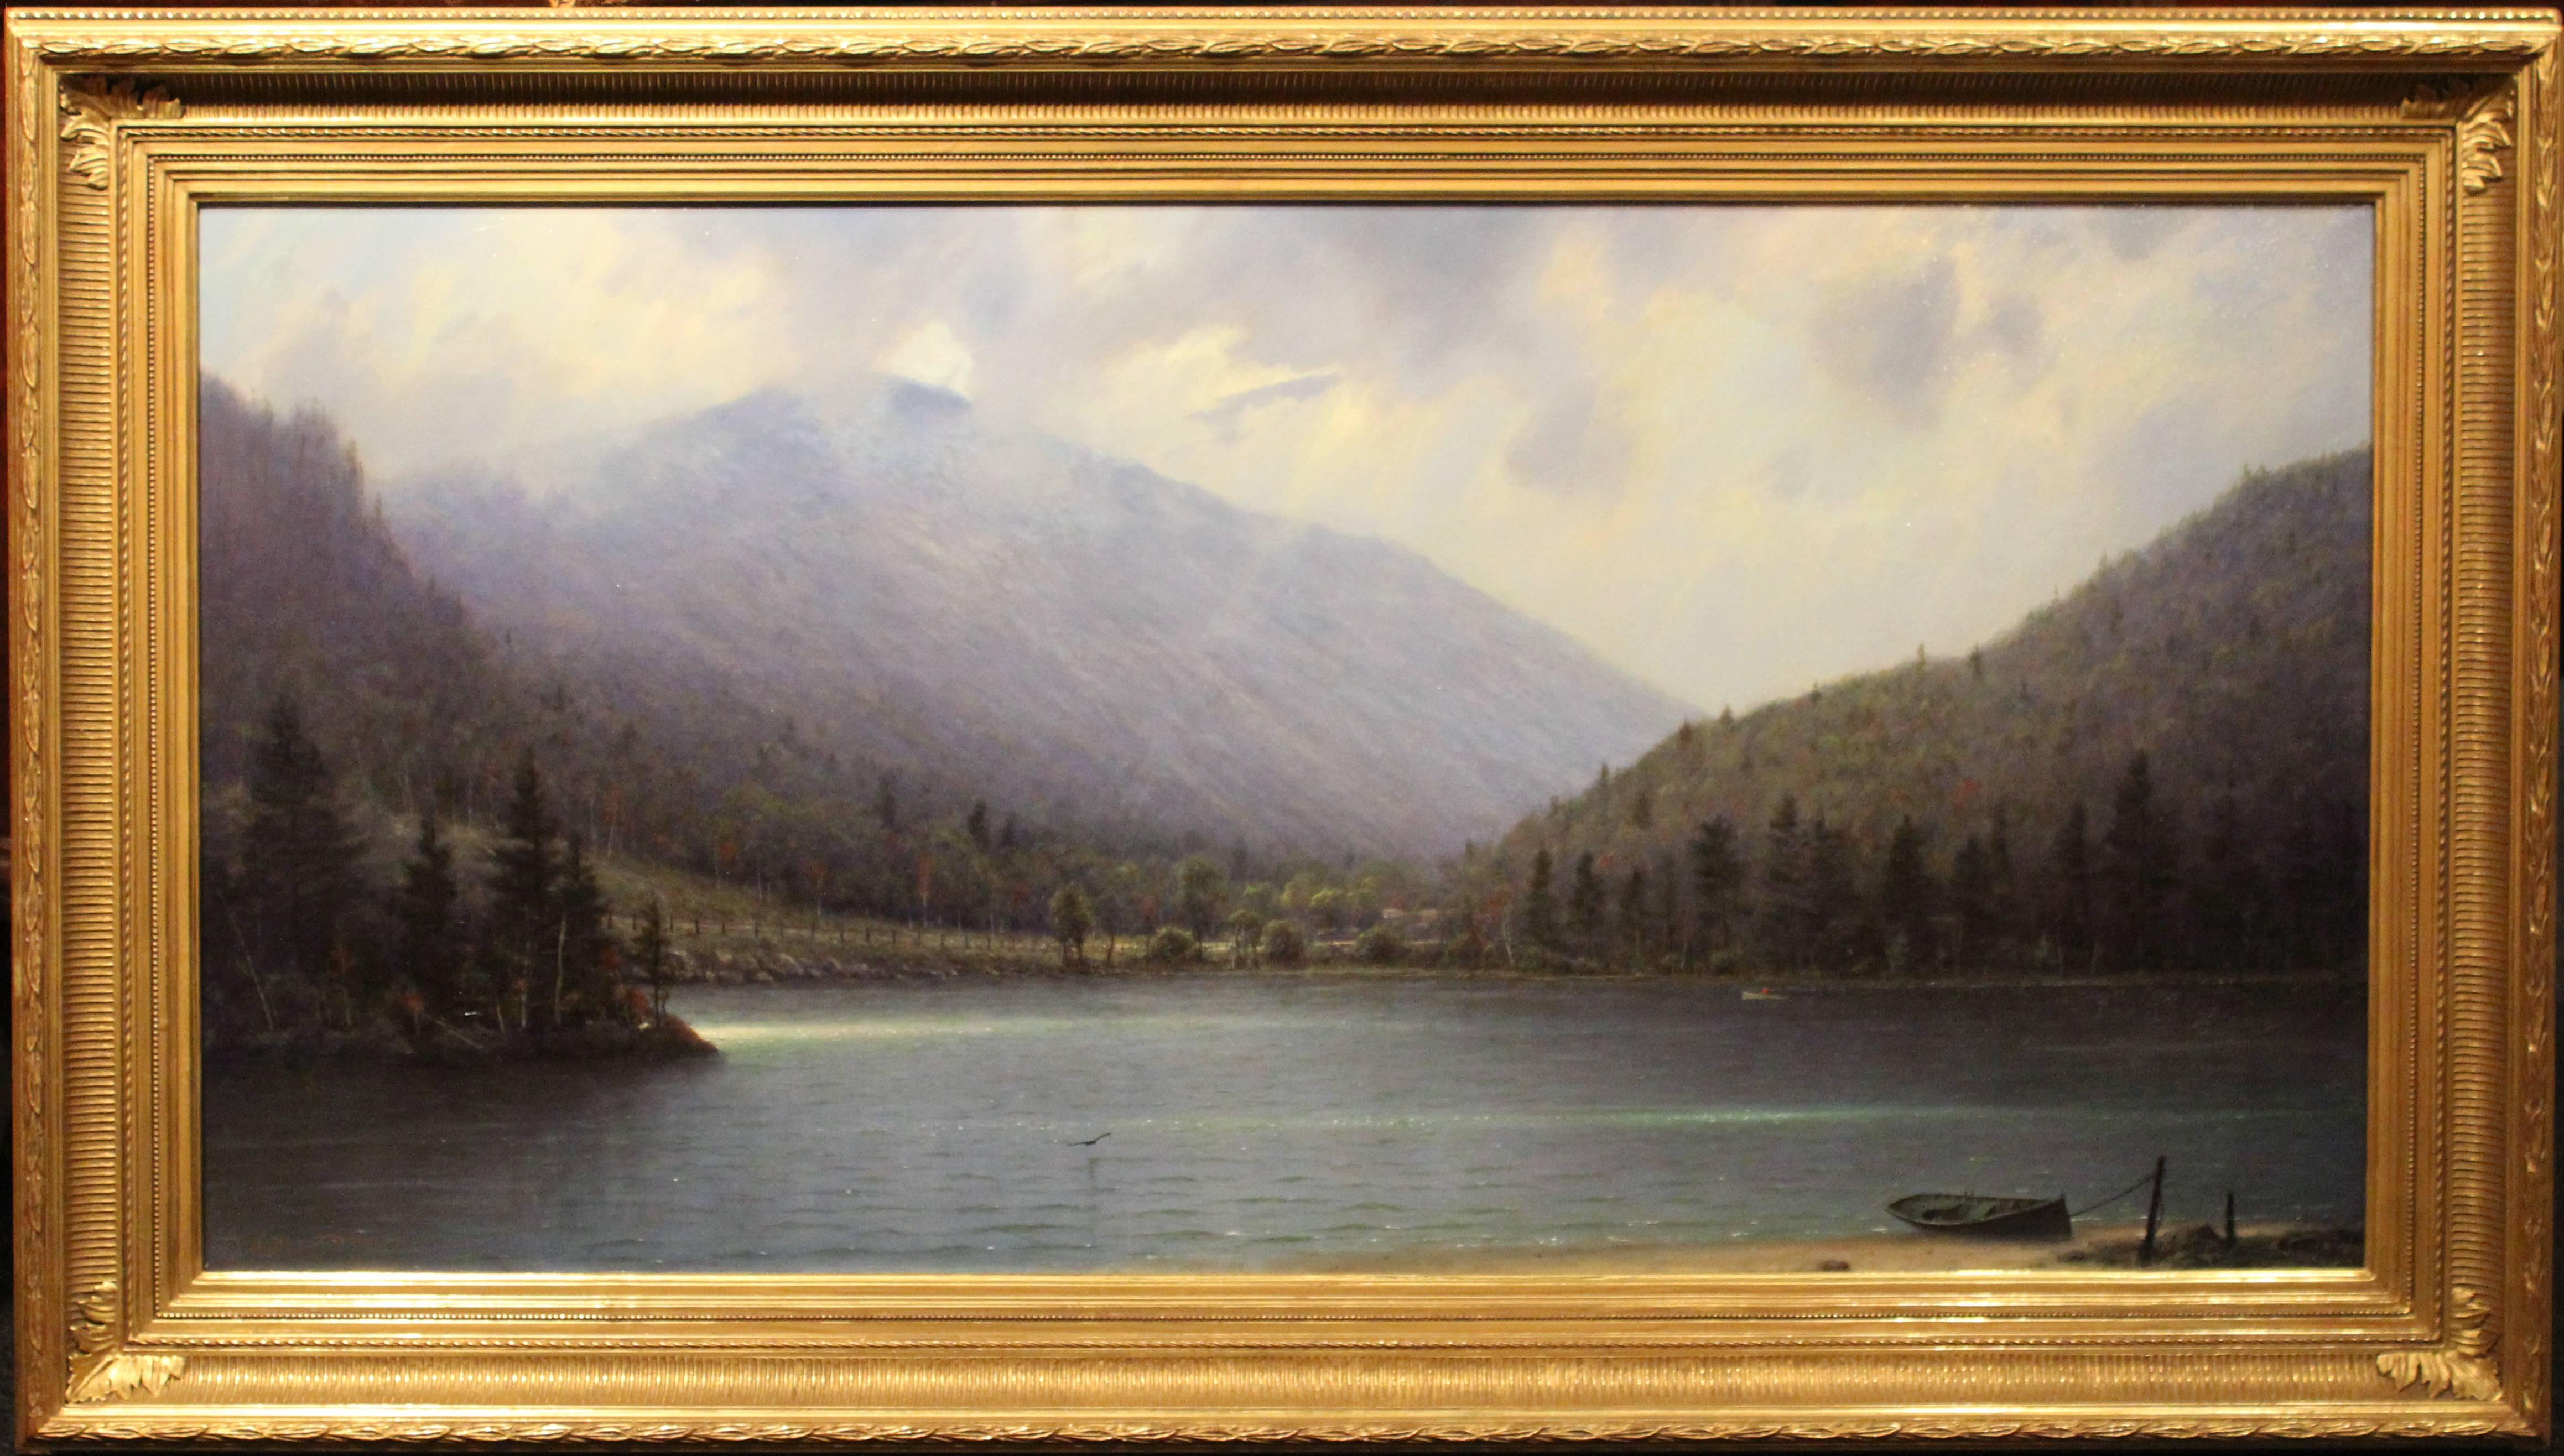 This wonderful White Mountain New Hampshire landscape painting was done by contemporary American artist William R. Davis (1952-). Davis was born in Somerville, Massachusetts, grew up in Hyannis Port, MA and became well-known in New England and